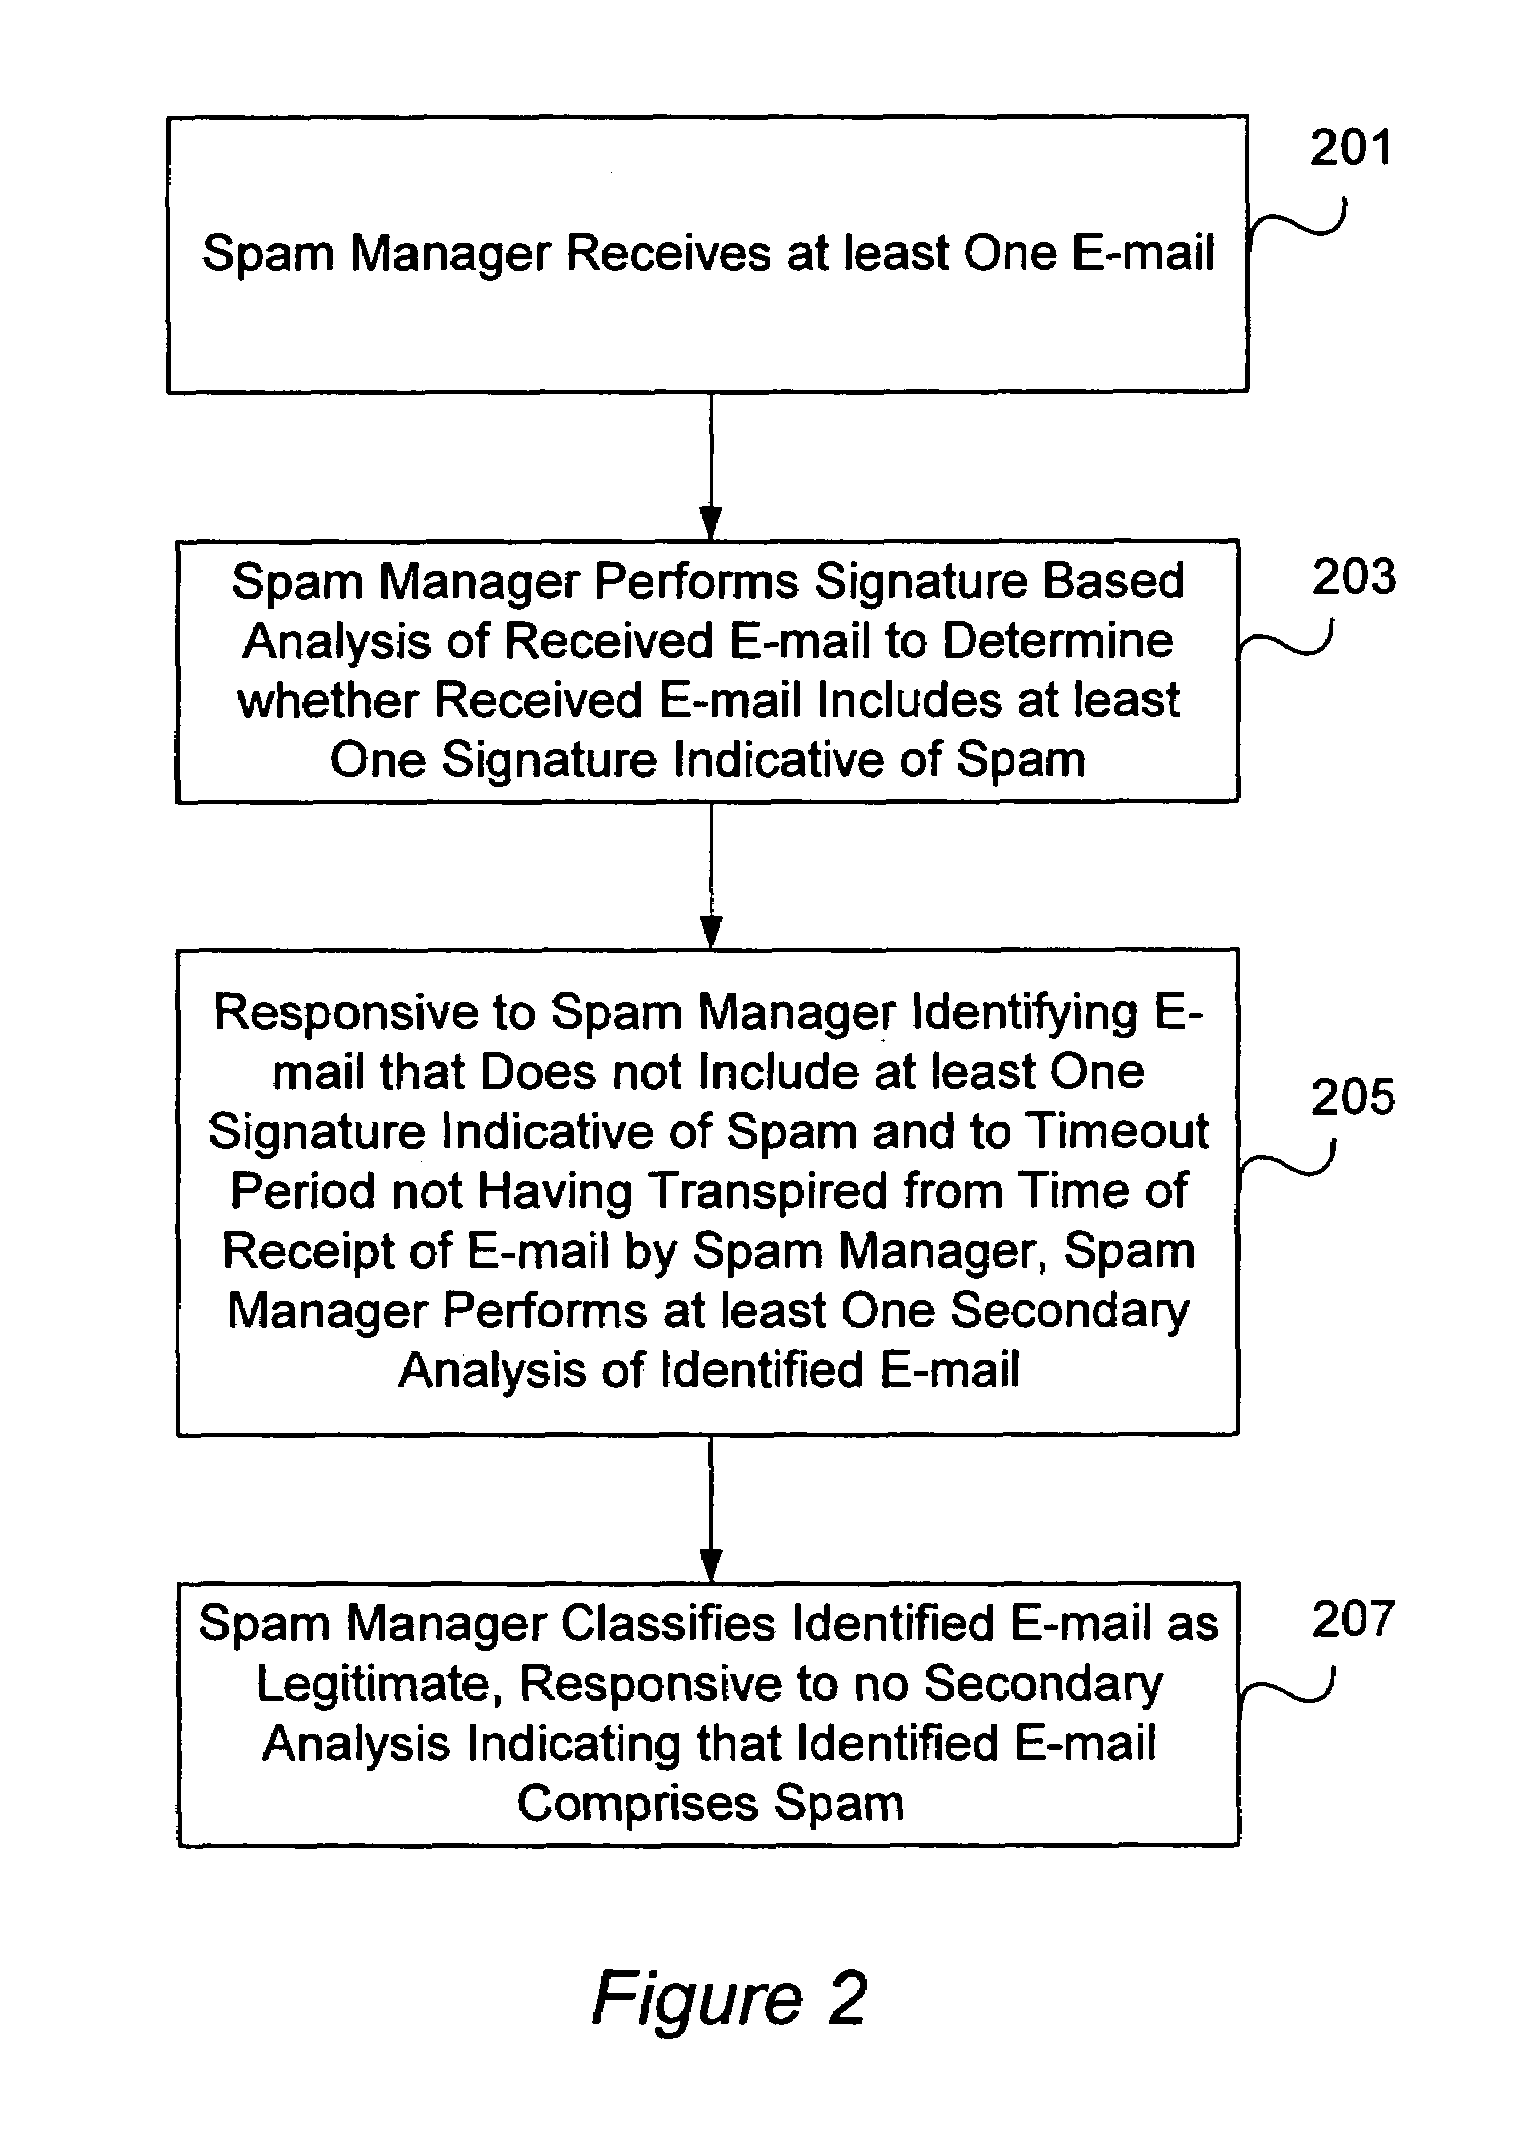 System utilizing updated spam signatures for performing secondary signature-based analysis of a held e-mail to improve spam email detection